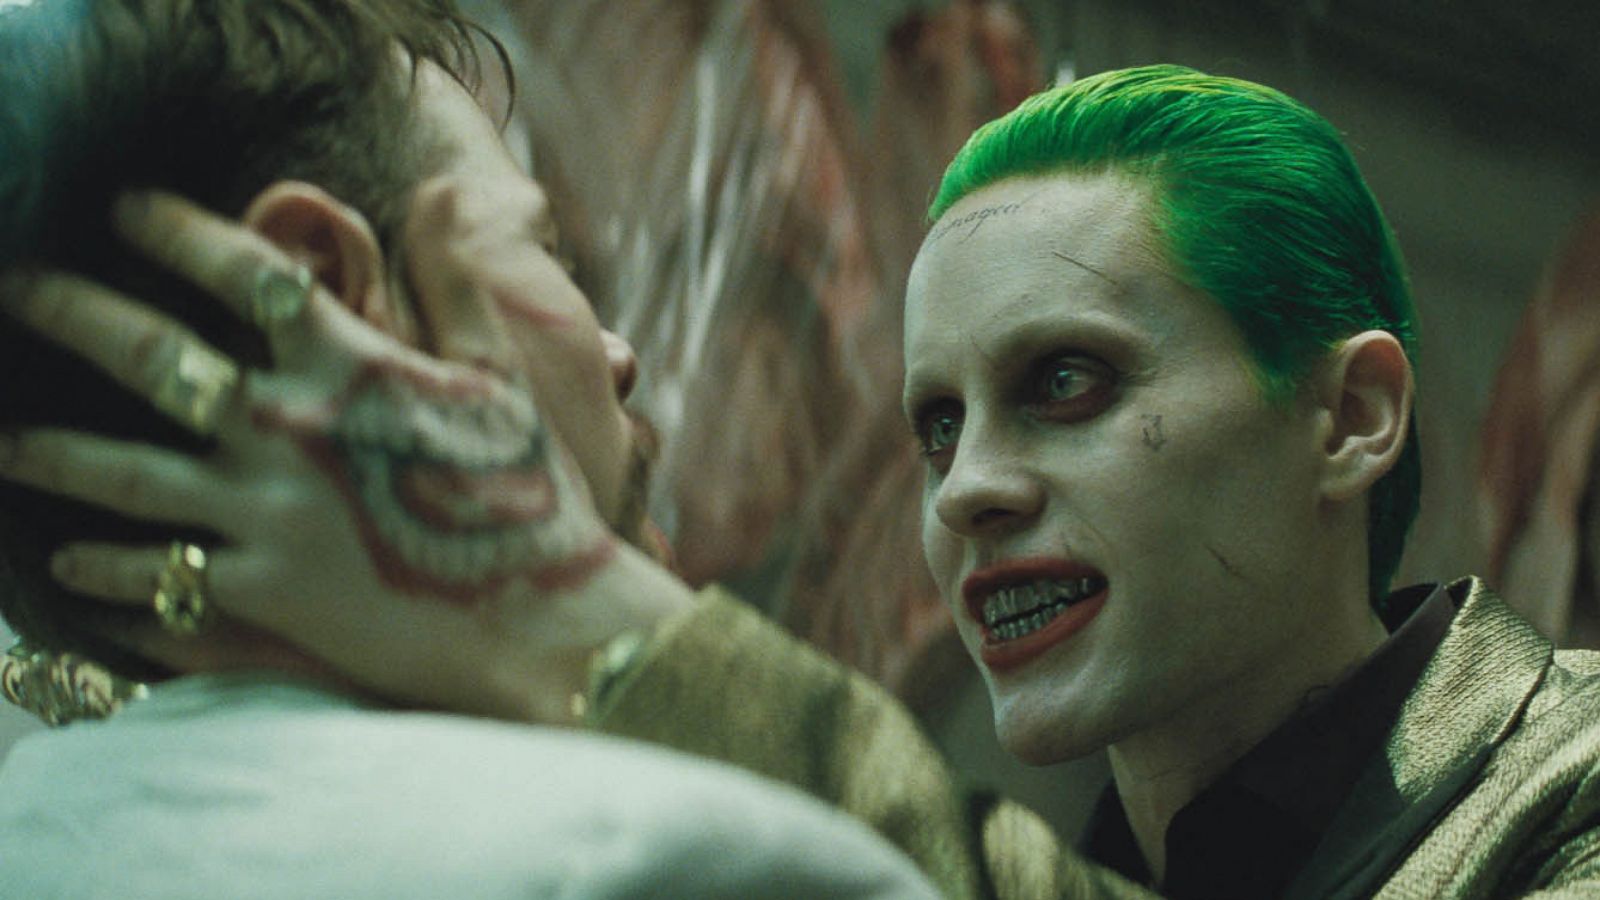 Surgir Decaer Automatización Will Smith on Jared Leto's Role in 'Suicide Squad': 'He Went Full Joker' -  ABC News